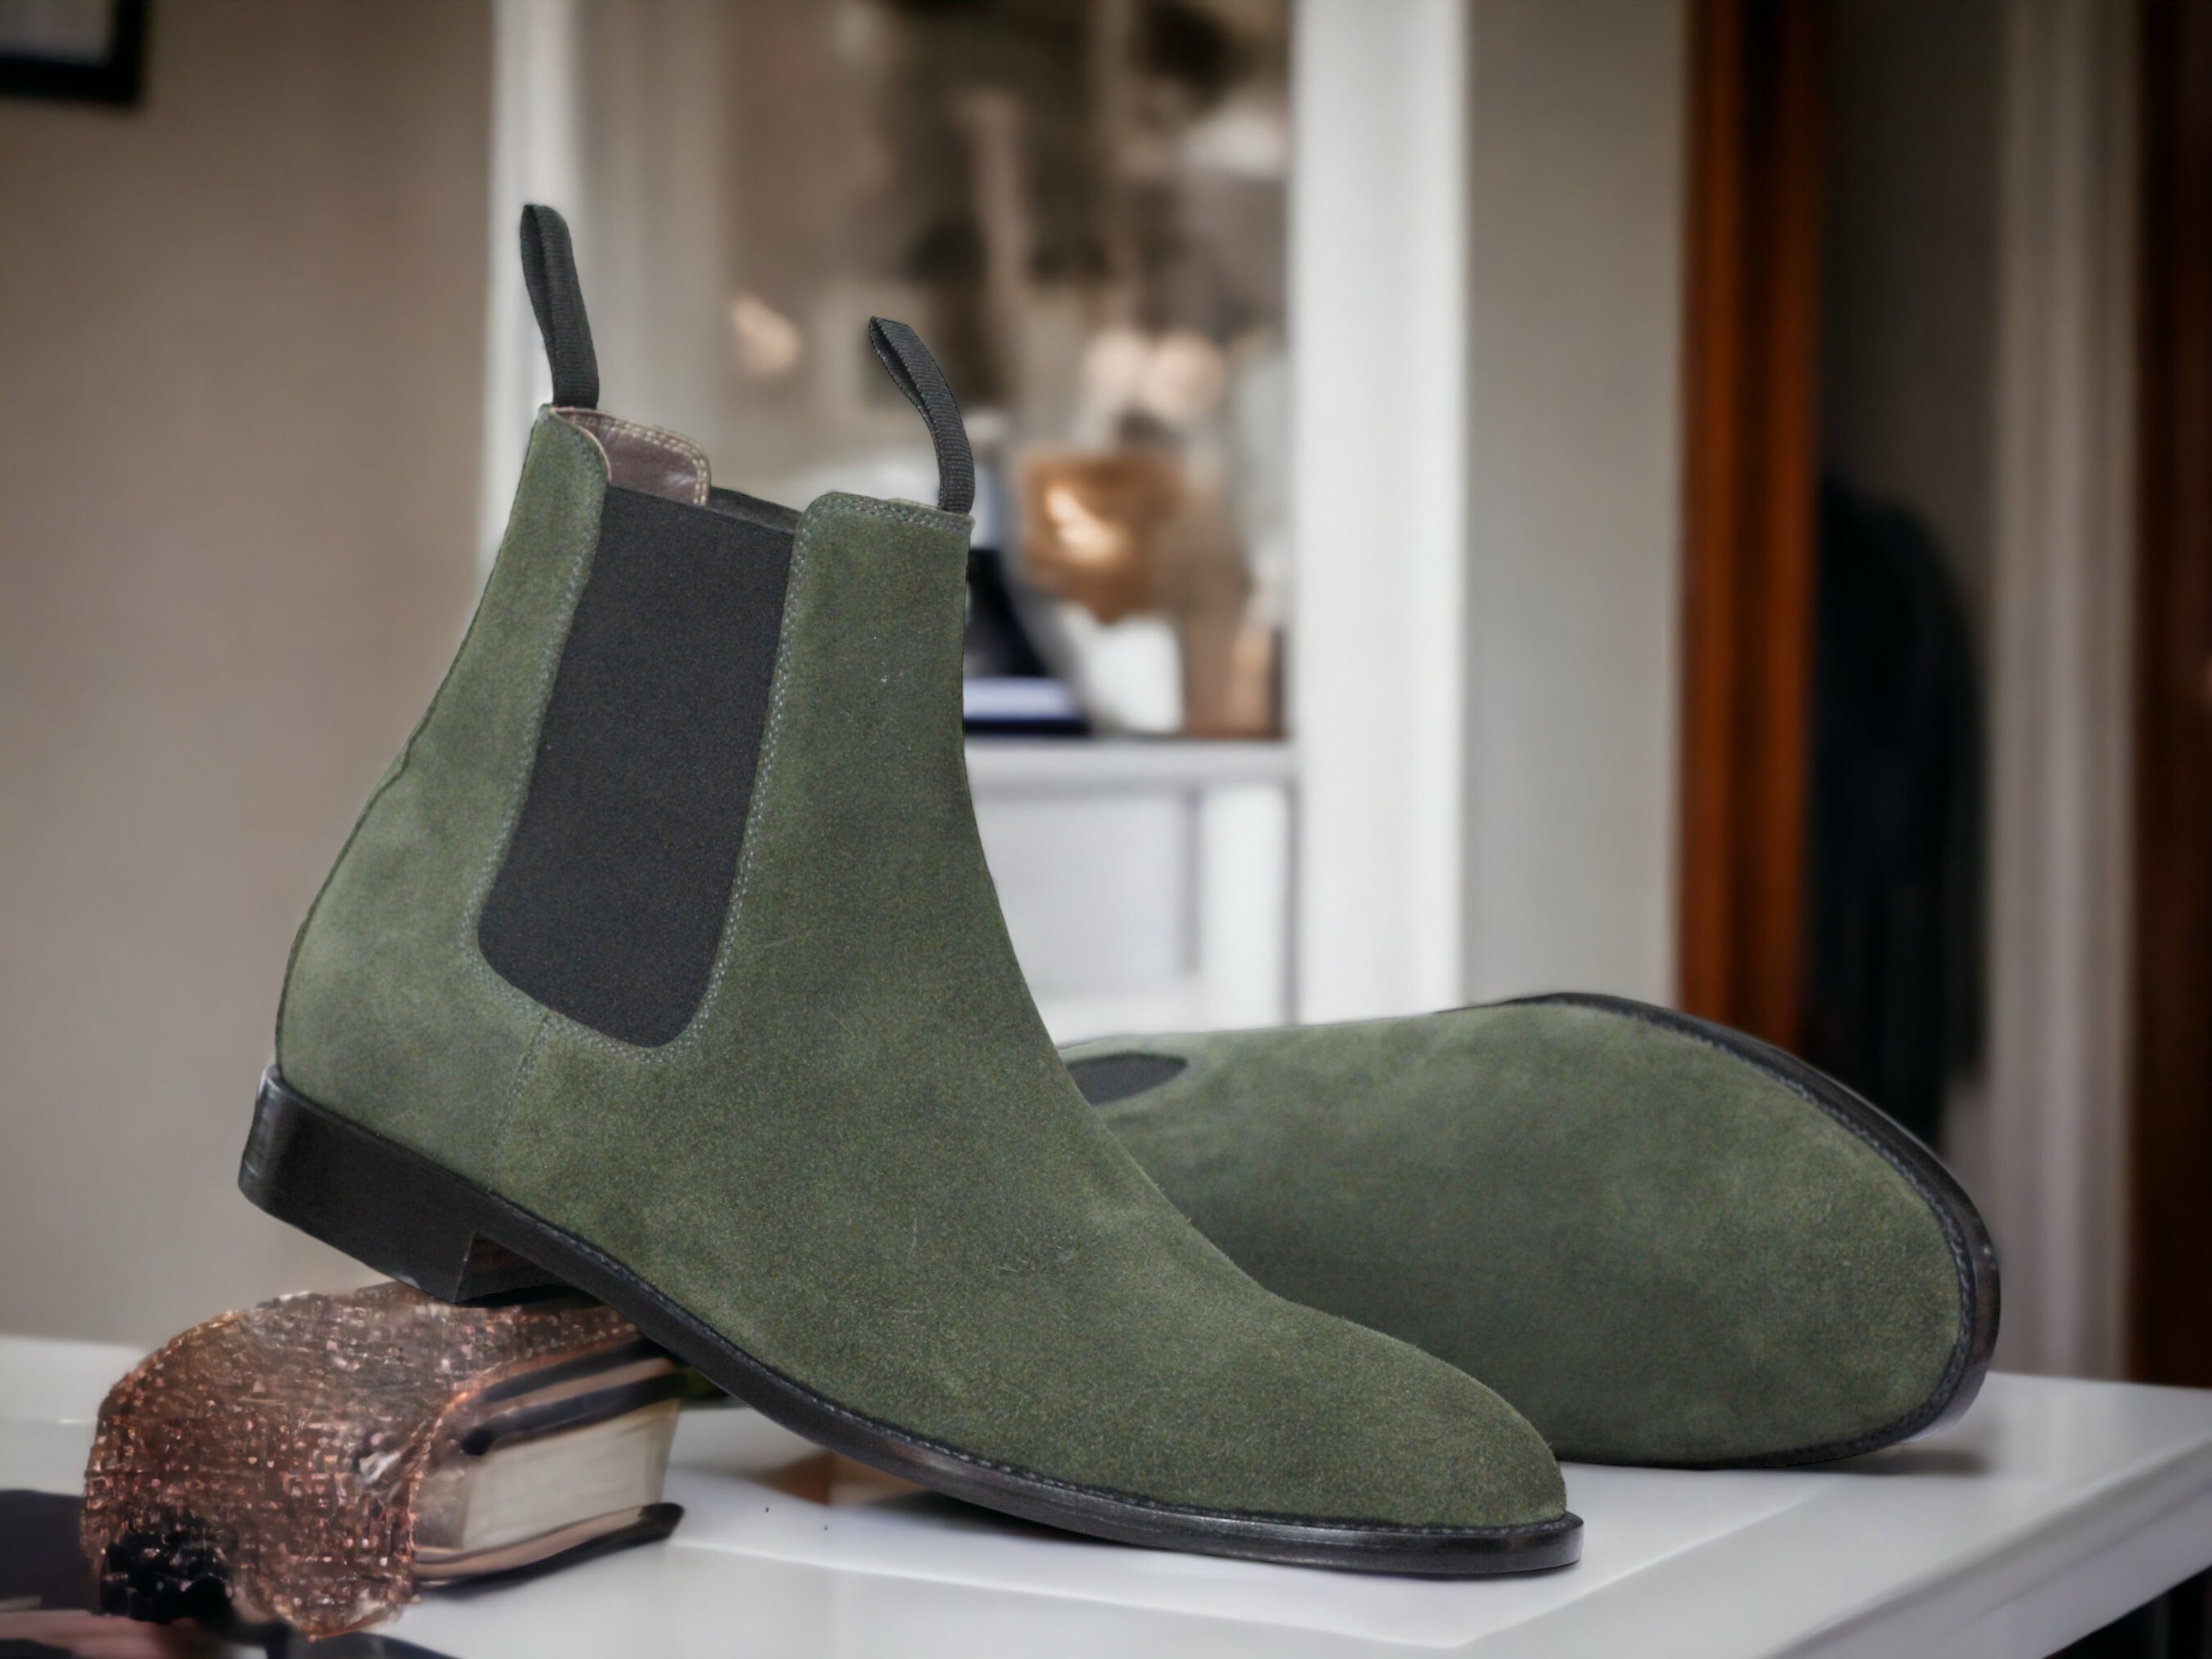 Bespoke Handmade Suede Chelsea Boots, Olive Green Dress Formal Slip On Boots, Men's Goodyear Welted Ankle High Boots